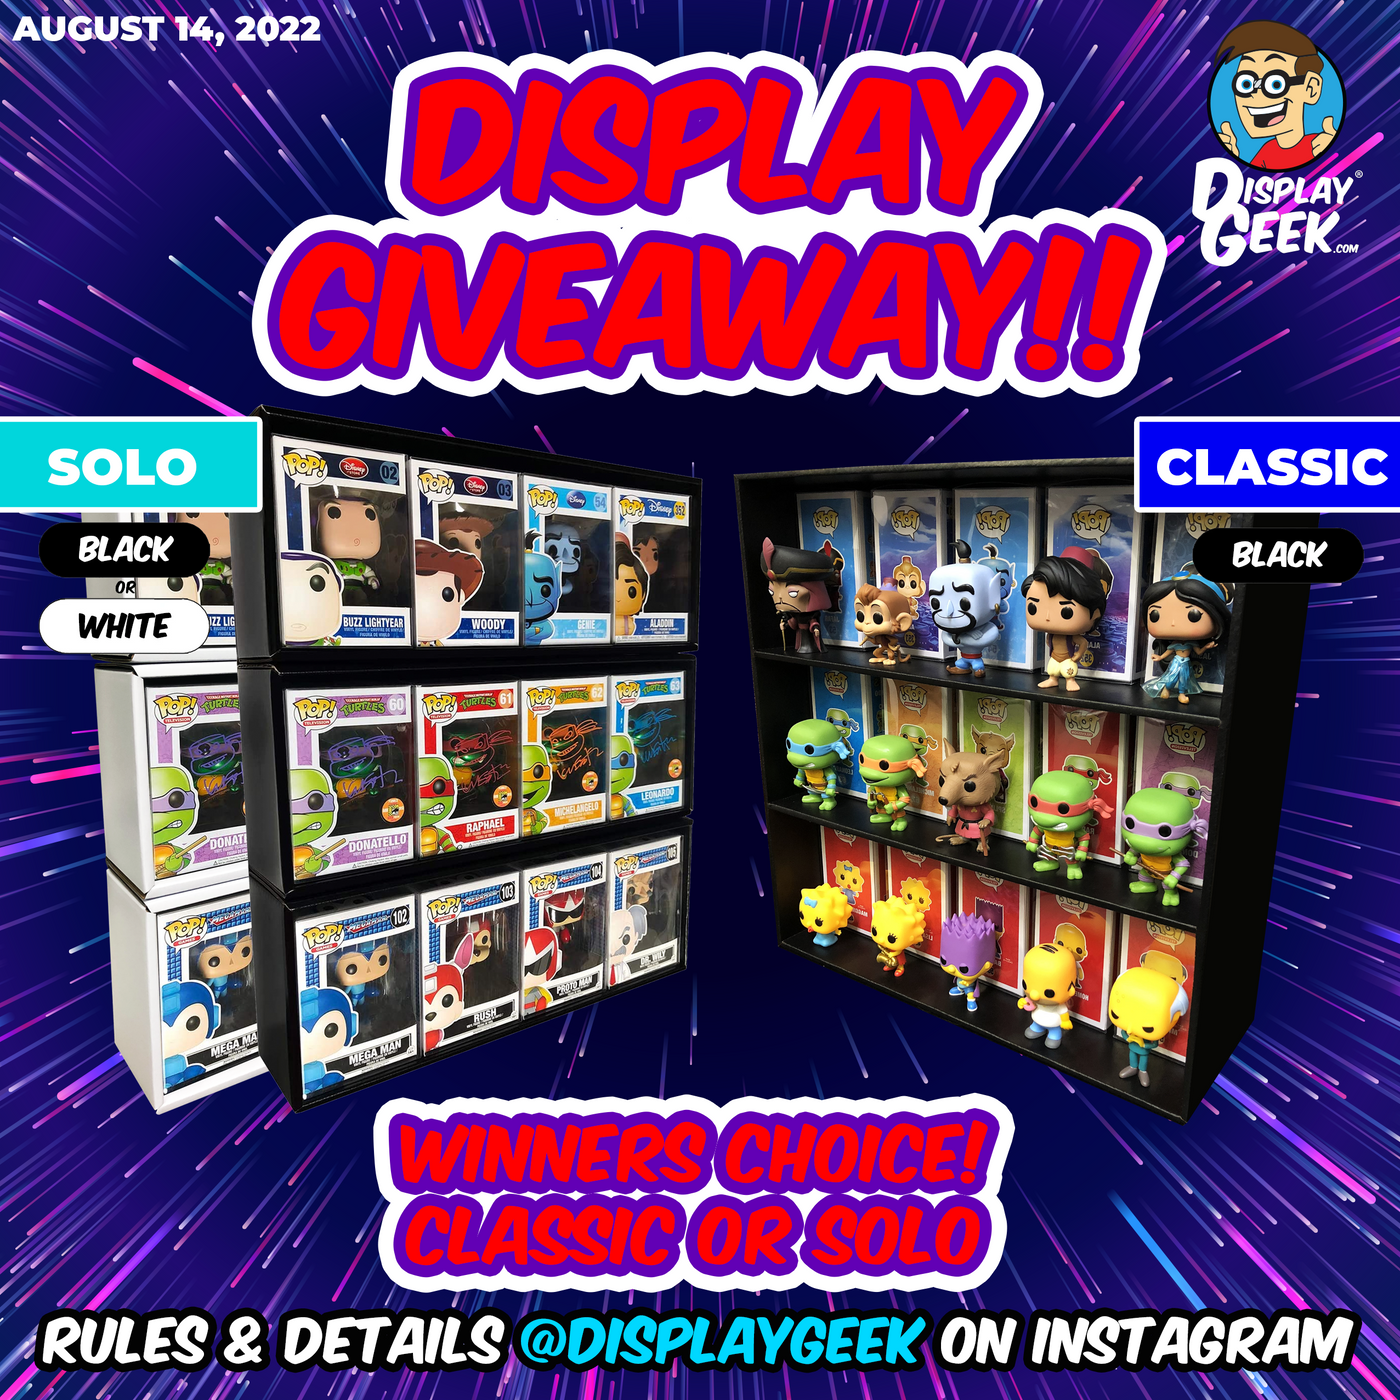 Display Case Giveaway (August 14, 2022)